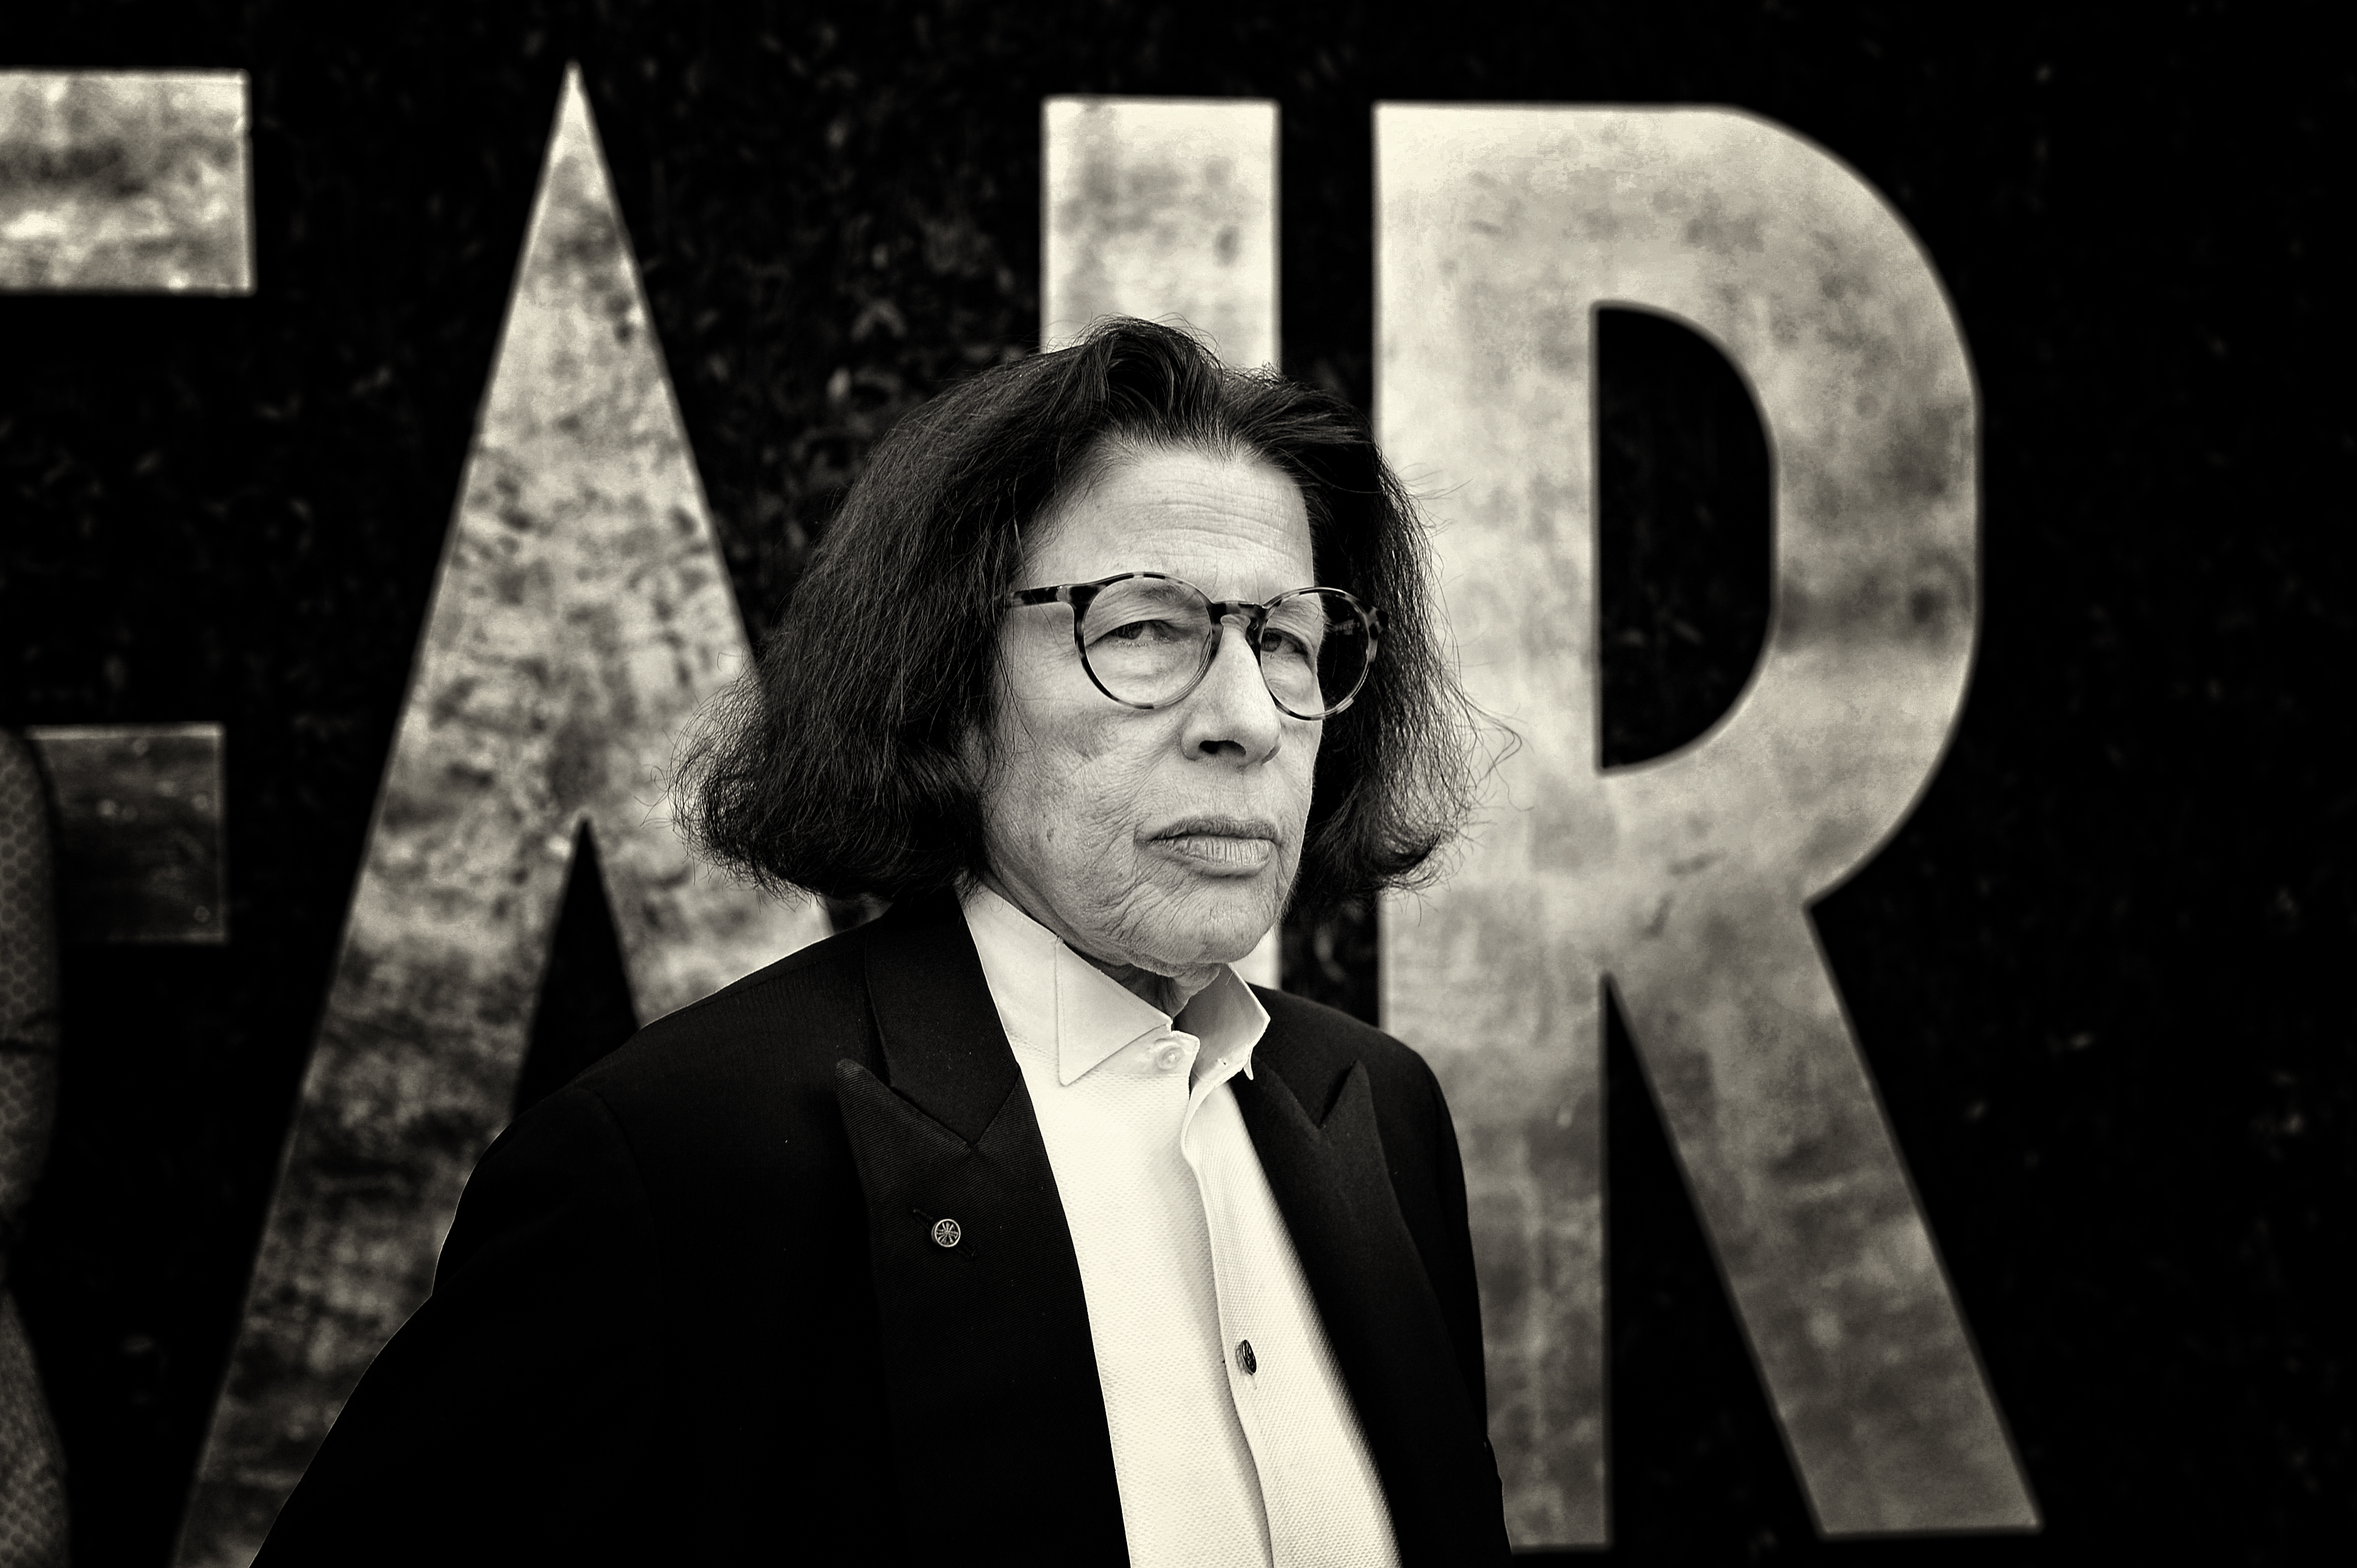 What Does Fran Lebowitz Really Think About Trump and #MeToo?